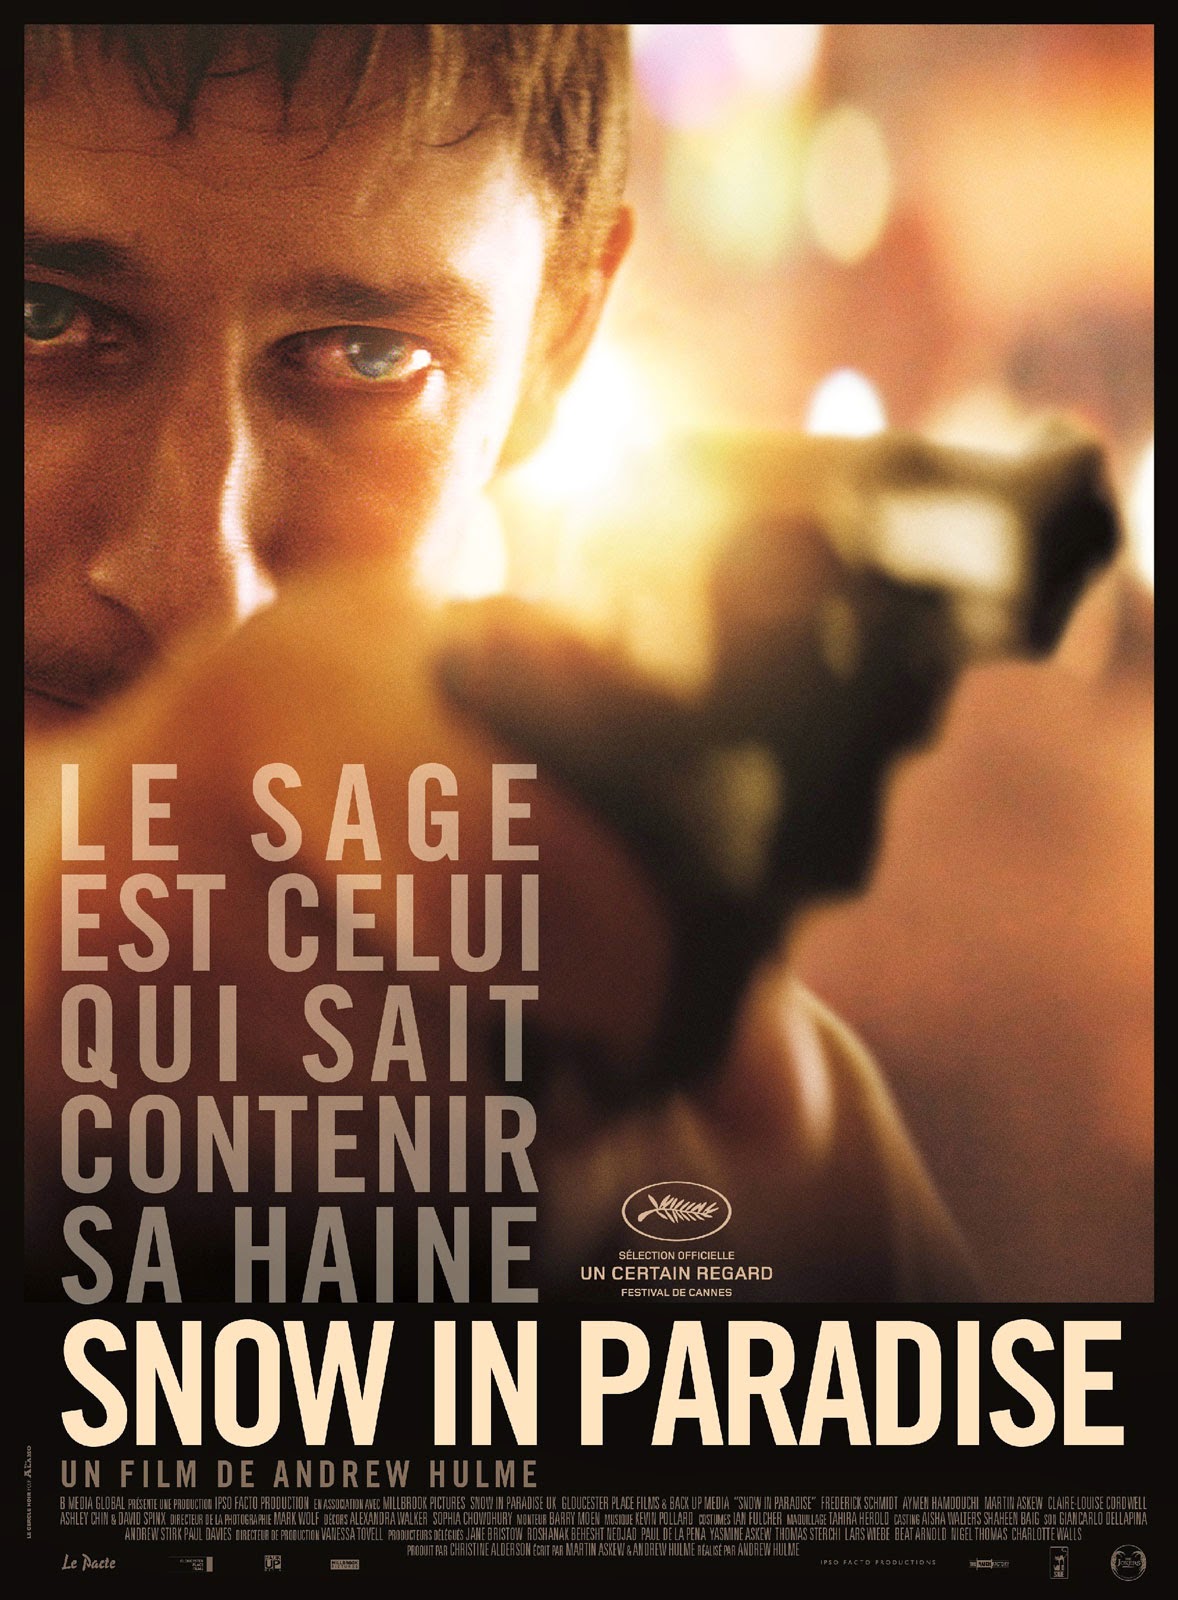 http://fuckingcinephiles.blogspot.fr/2015/03/critique-snow-in-paradise.html